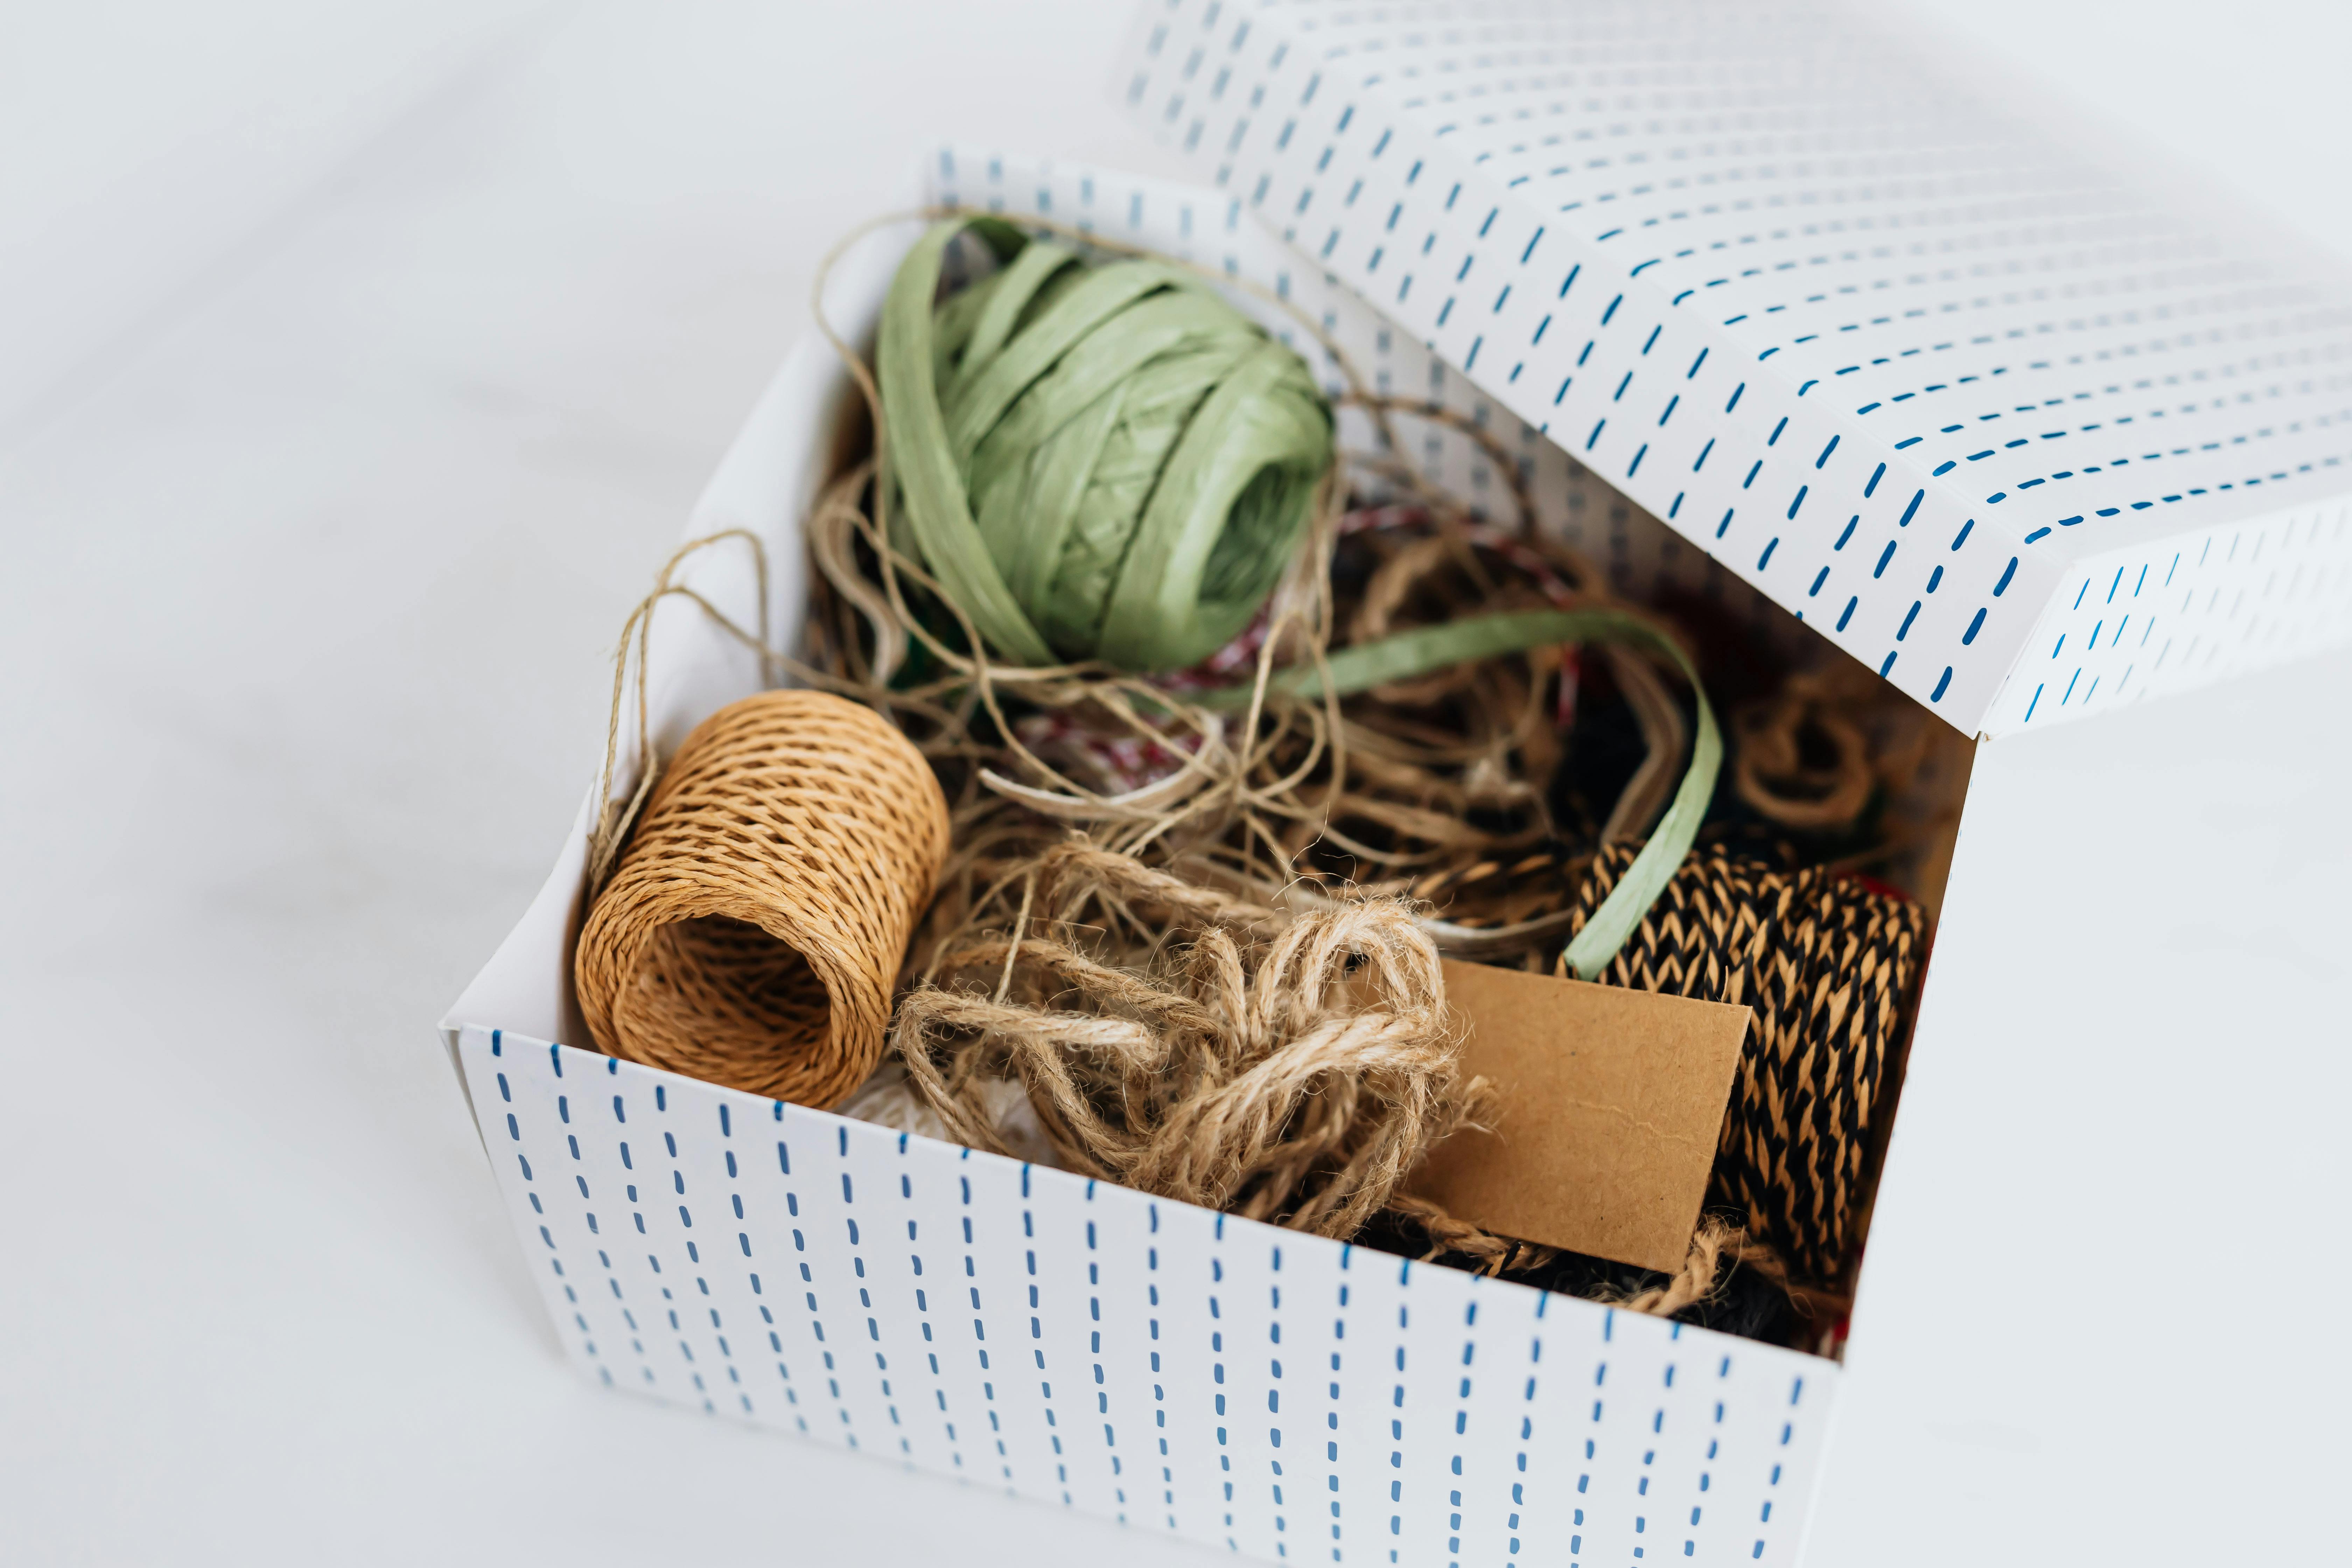 A box with decorations | Source: Pexels